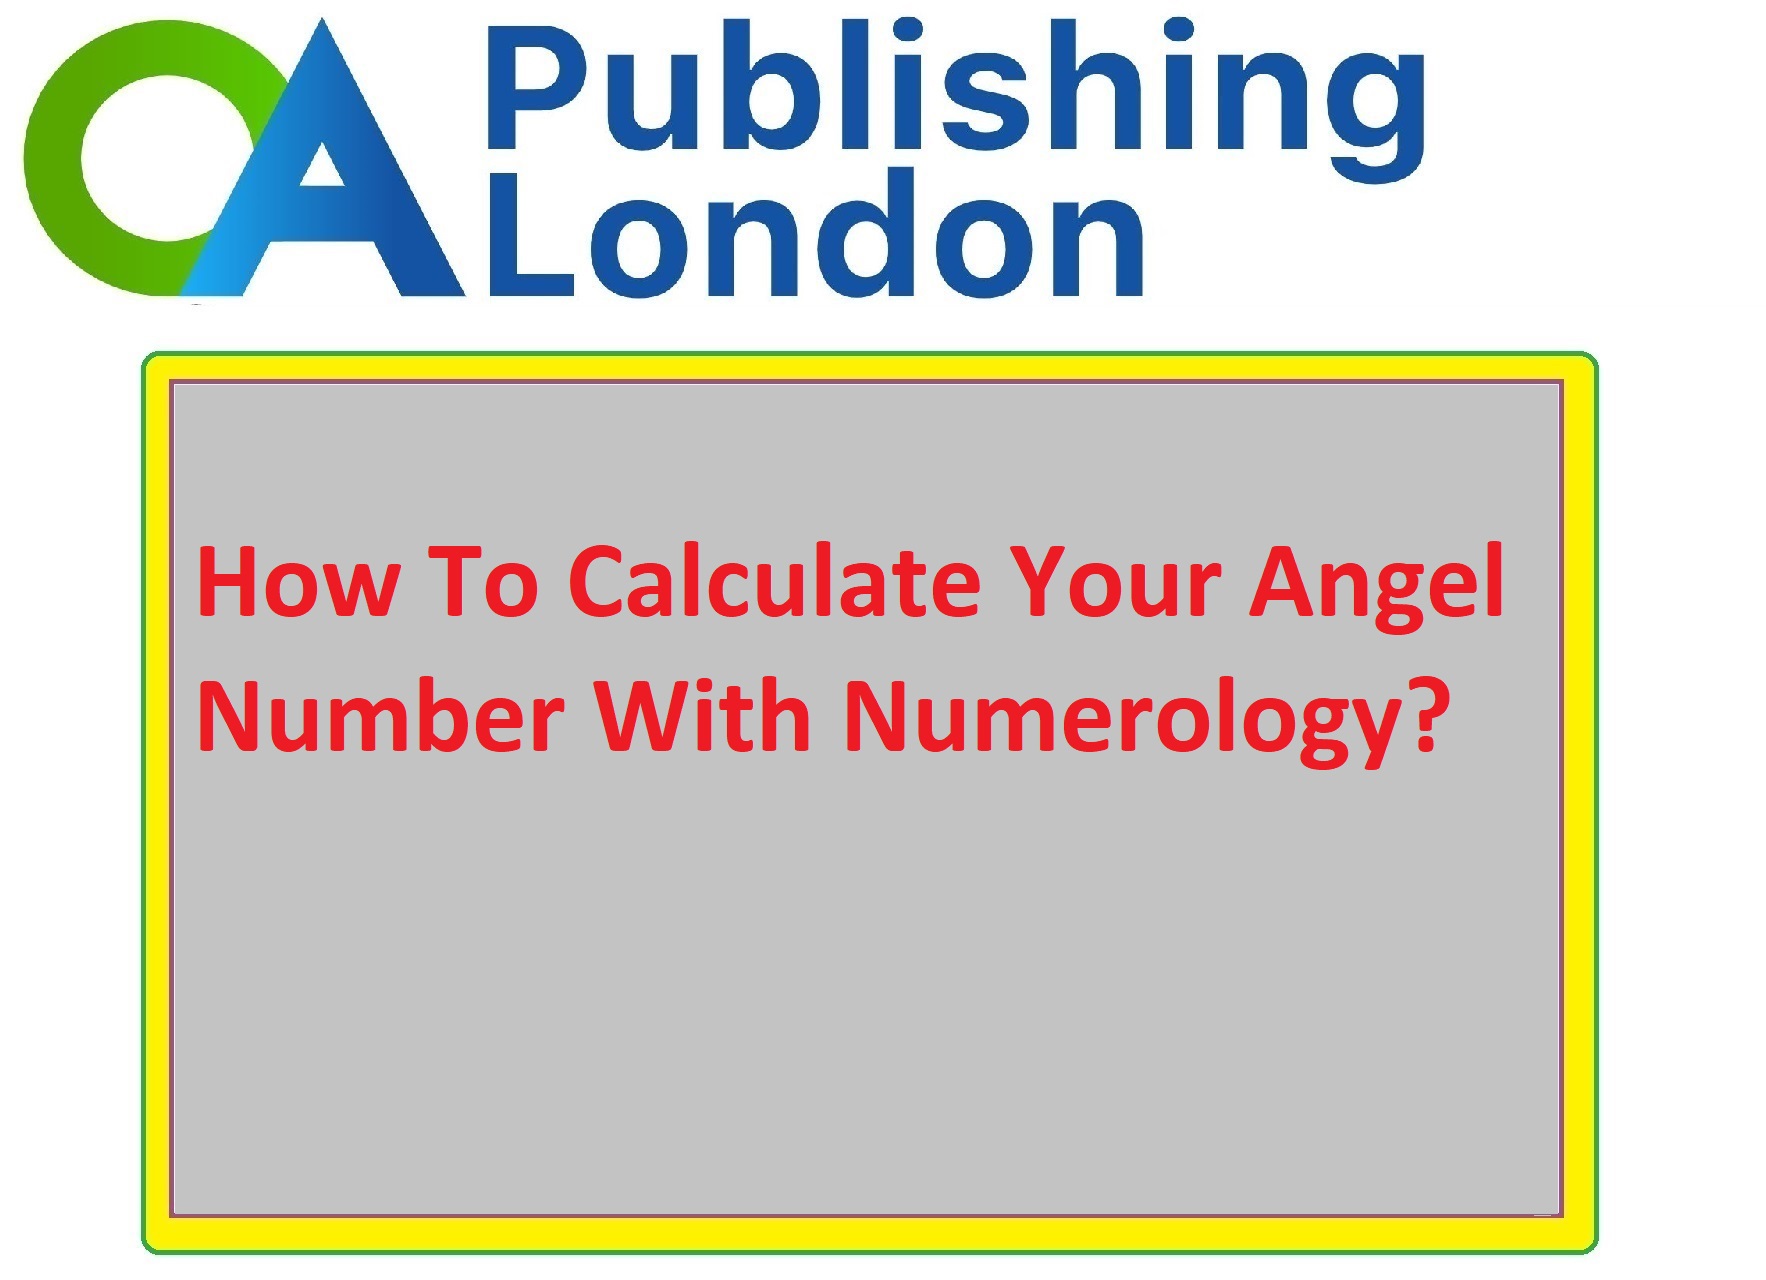 Calculate Your Angel Number With Numerology